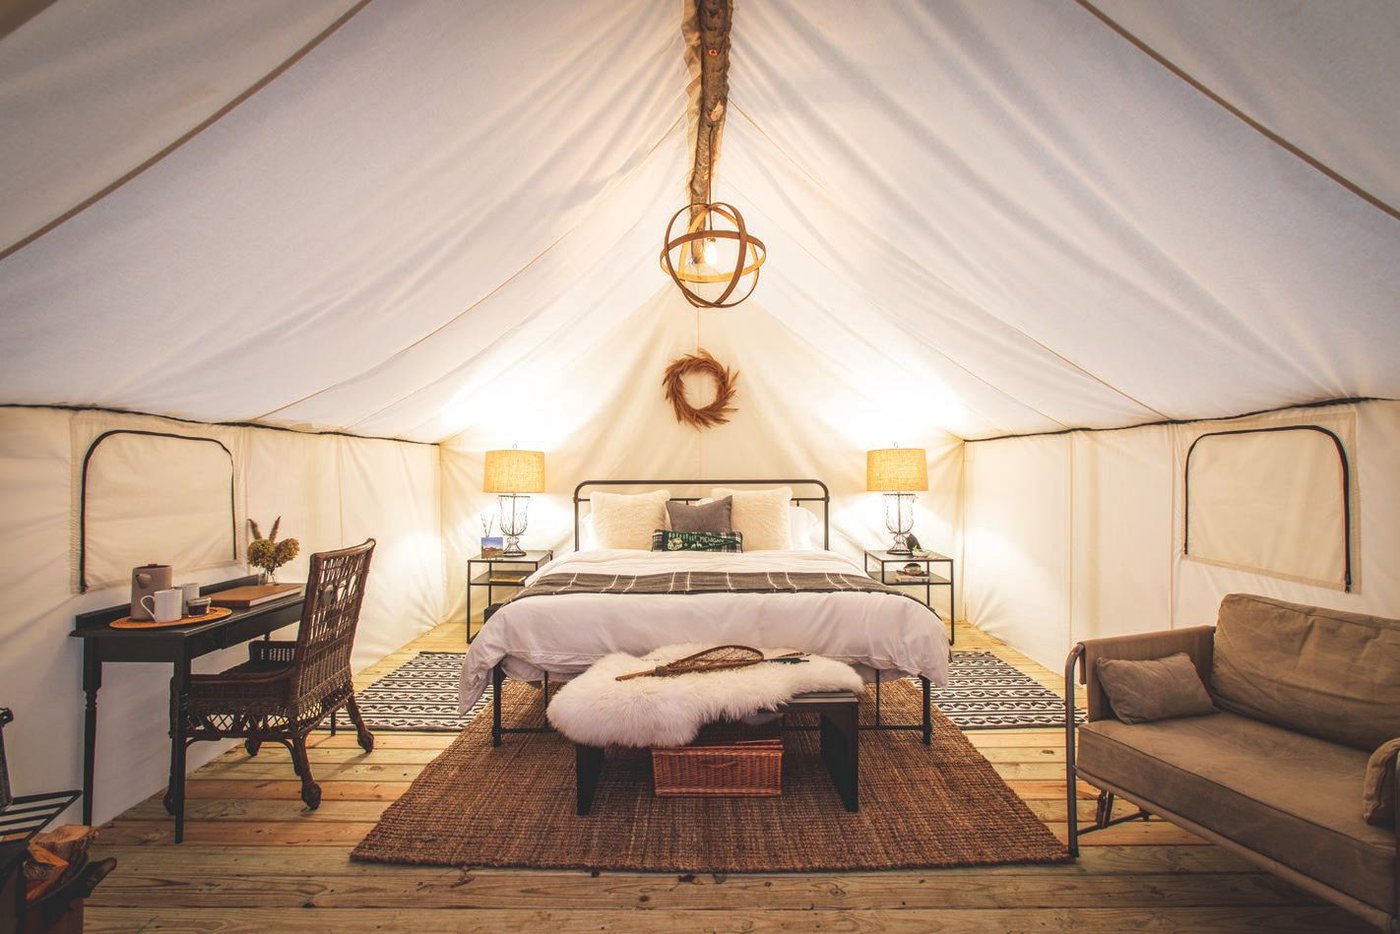 The luxurious setup of a tent at The Fields of Michigan. PHOTO COURTESY OF THE FIELDS OF MICHIGAN